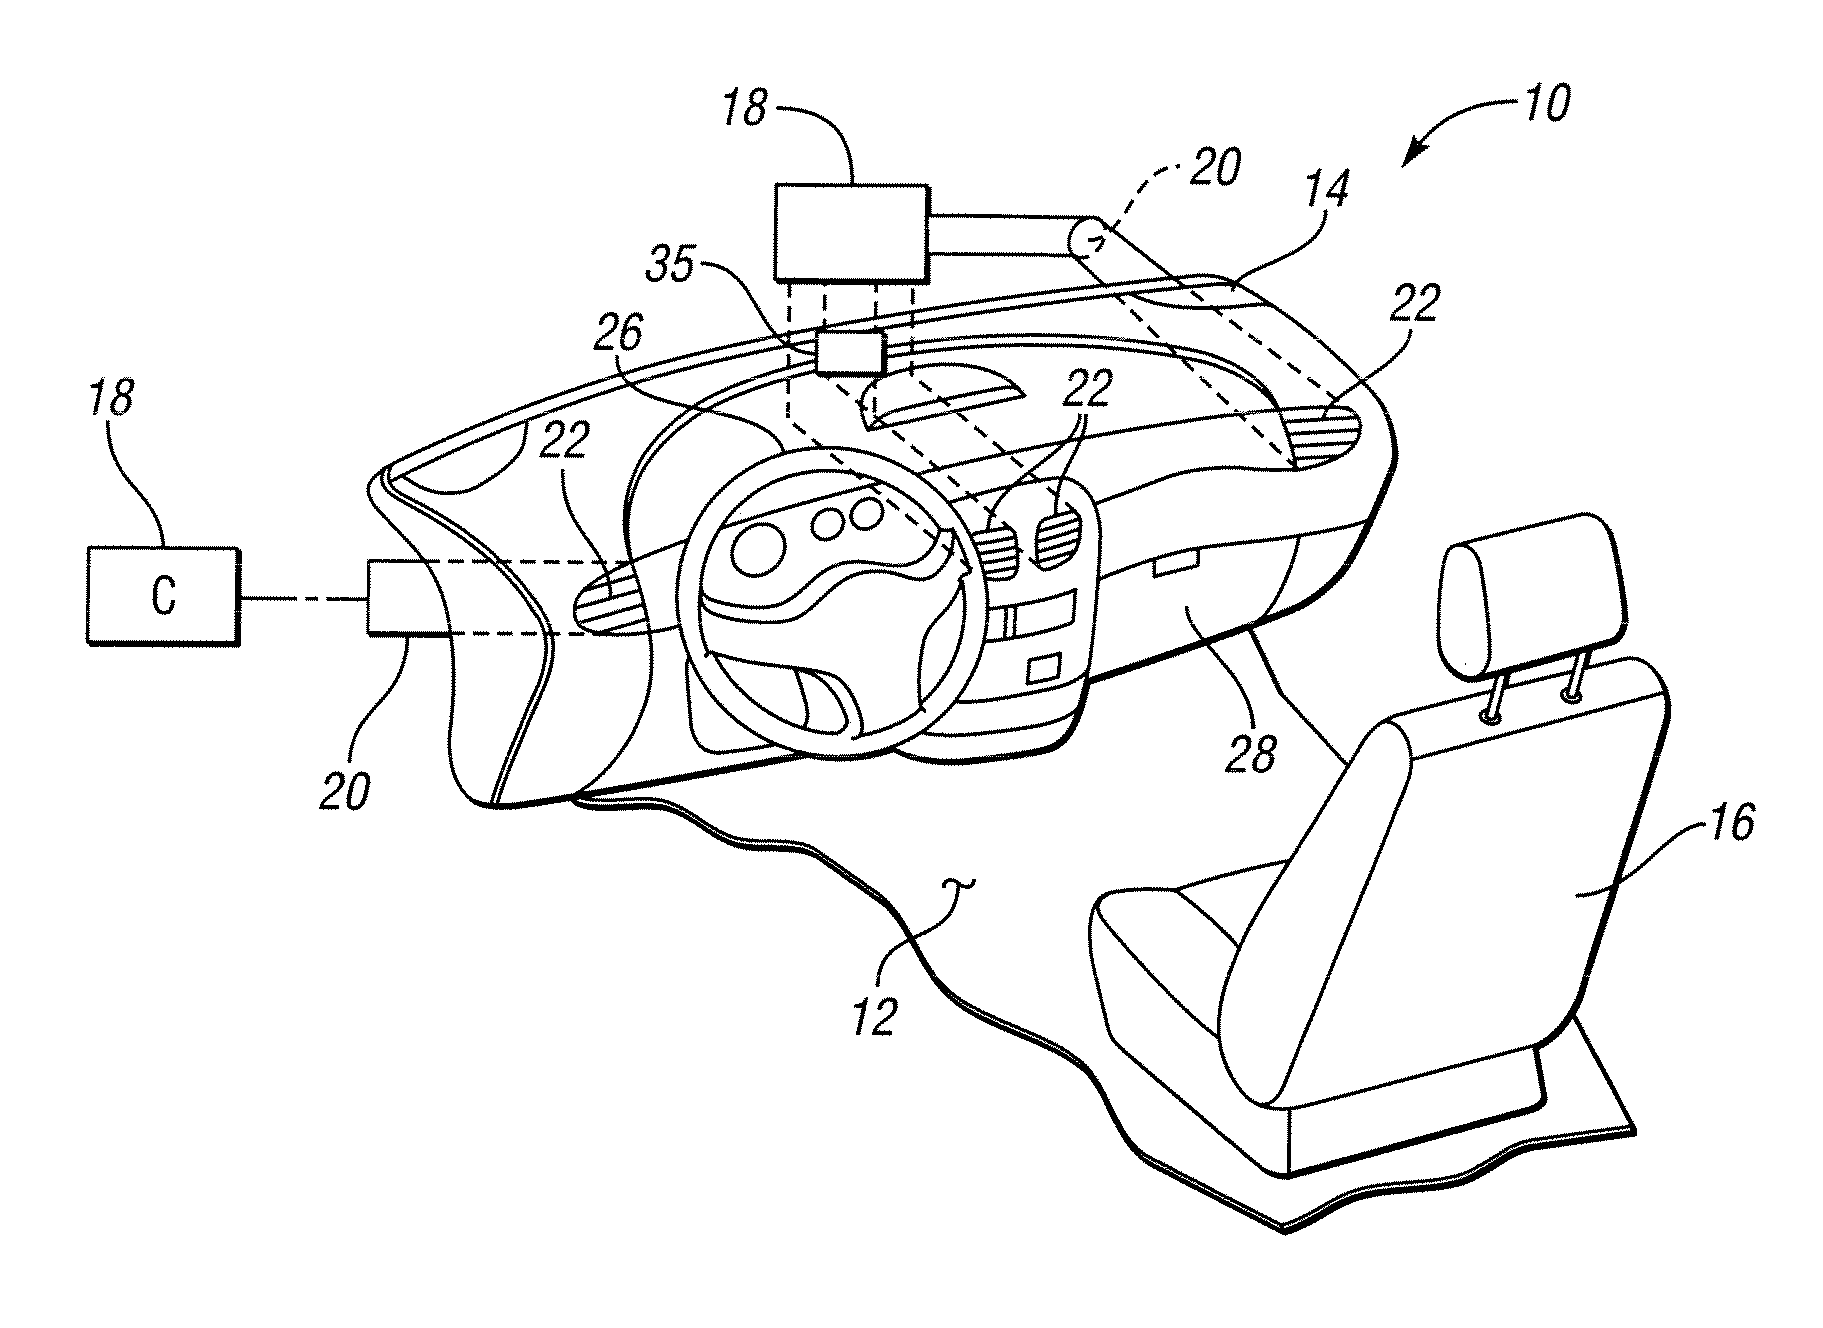 Vehicle Environmental Conditioning System and Method